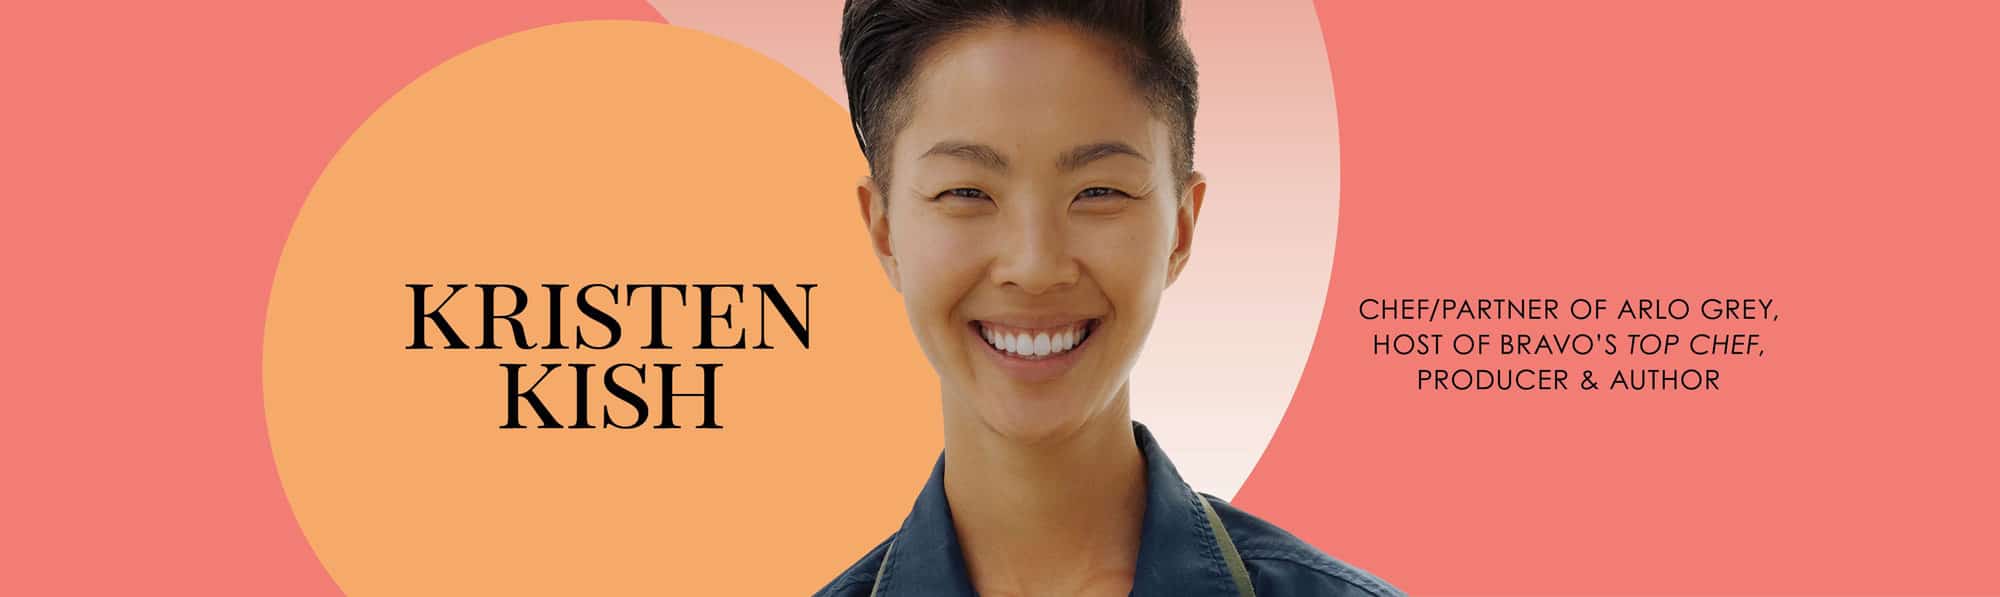 Join Kristen Kish at the California Conference for Women this February 29th!